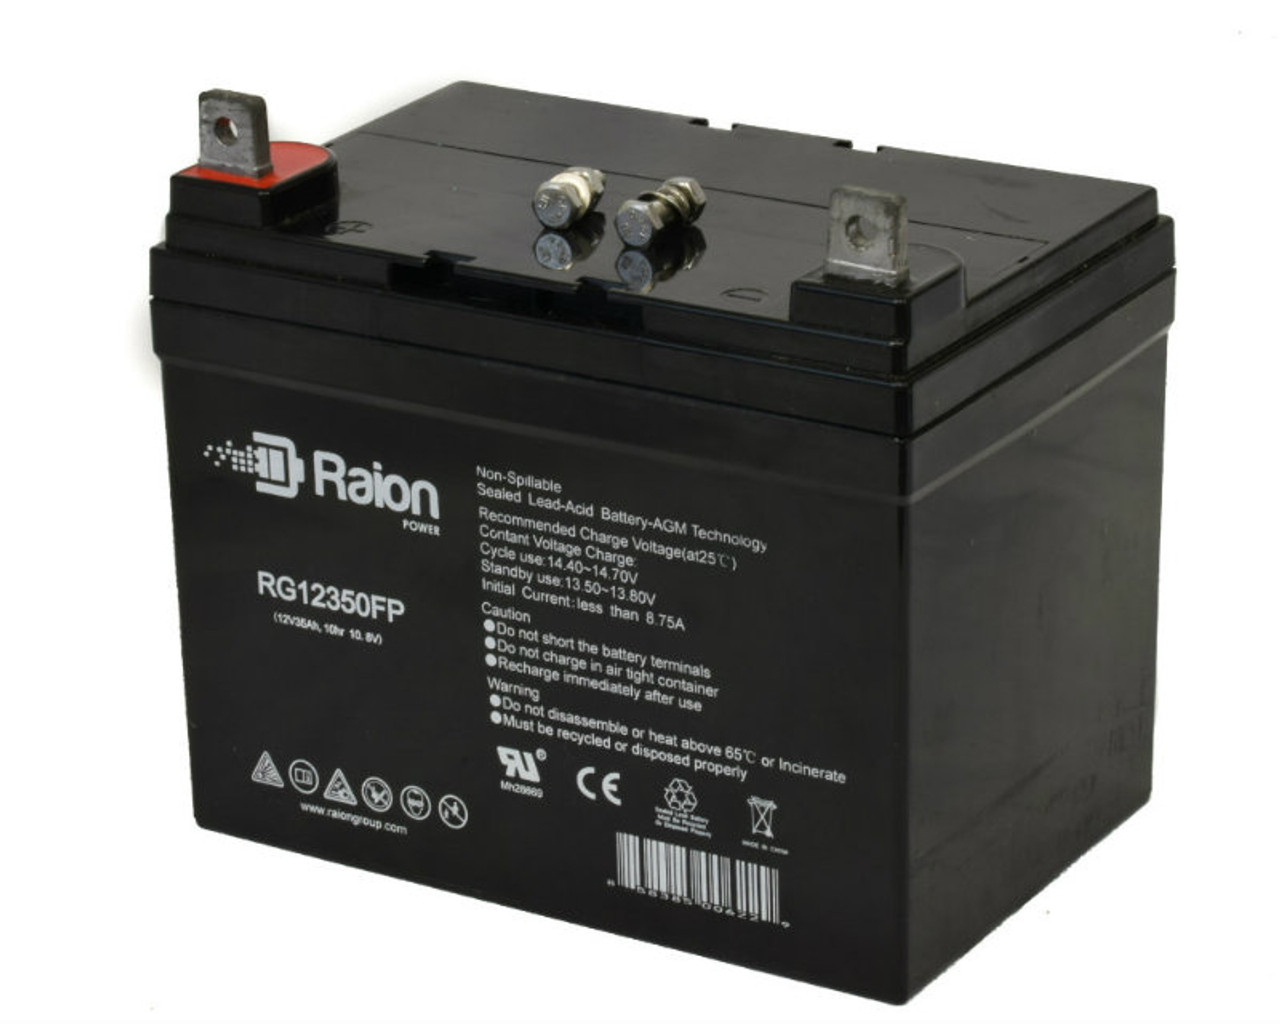 Raion Power Replacement 12V 35Ah Battery for Yard-Man J844H - 1 Pack